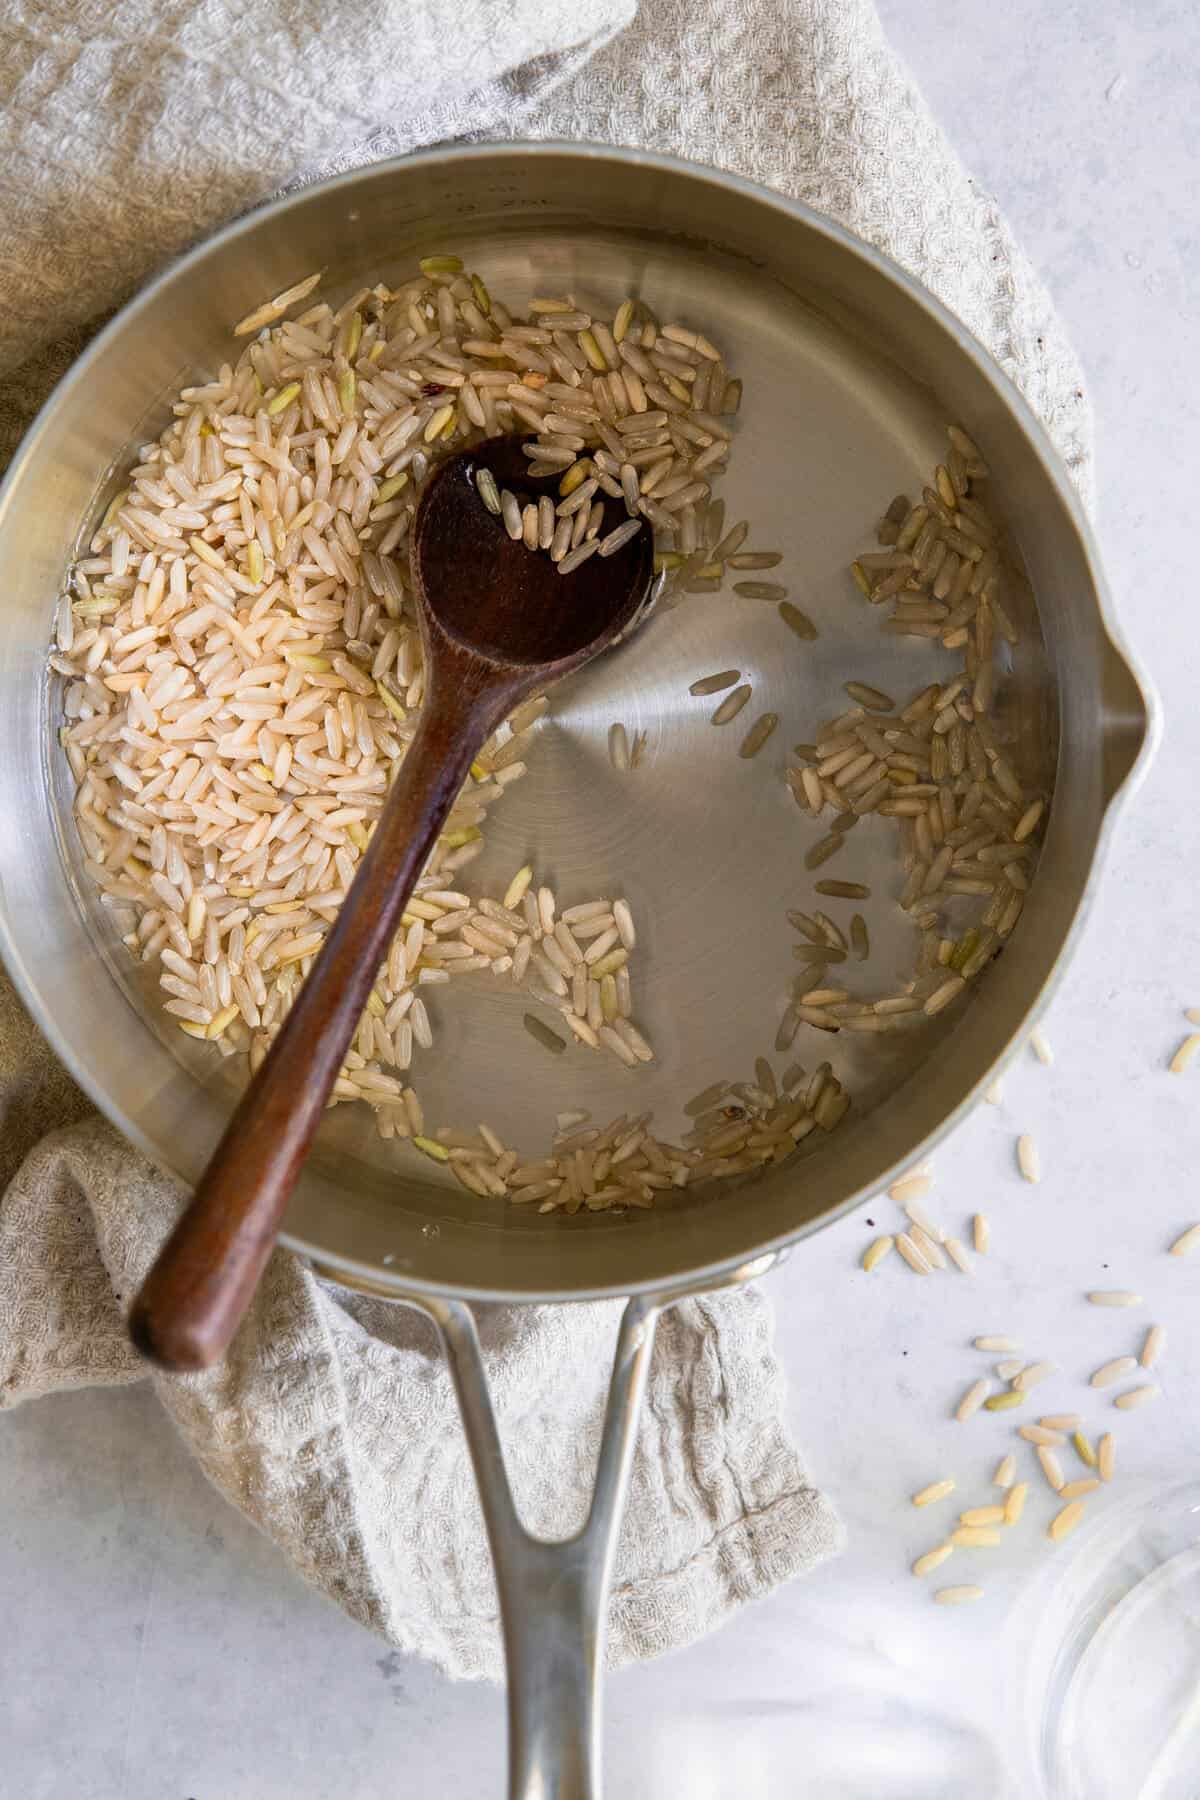 Making rice water for hair growth spray